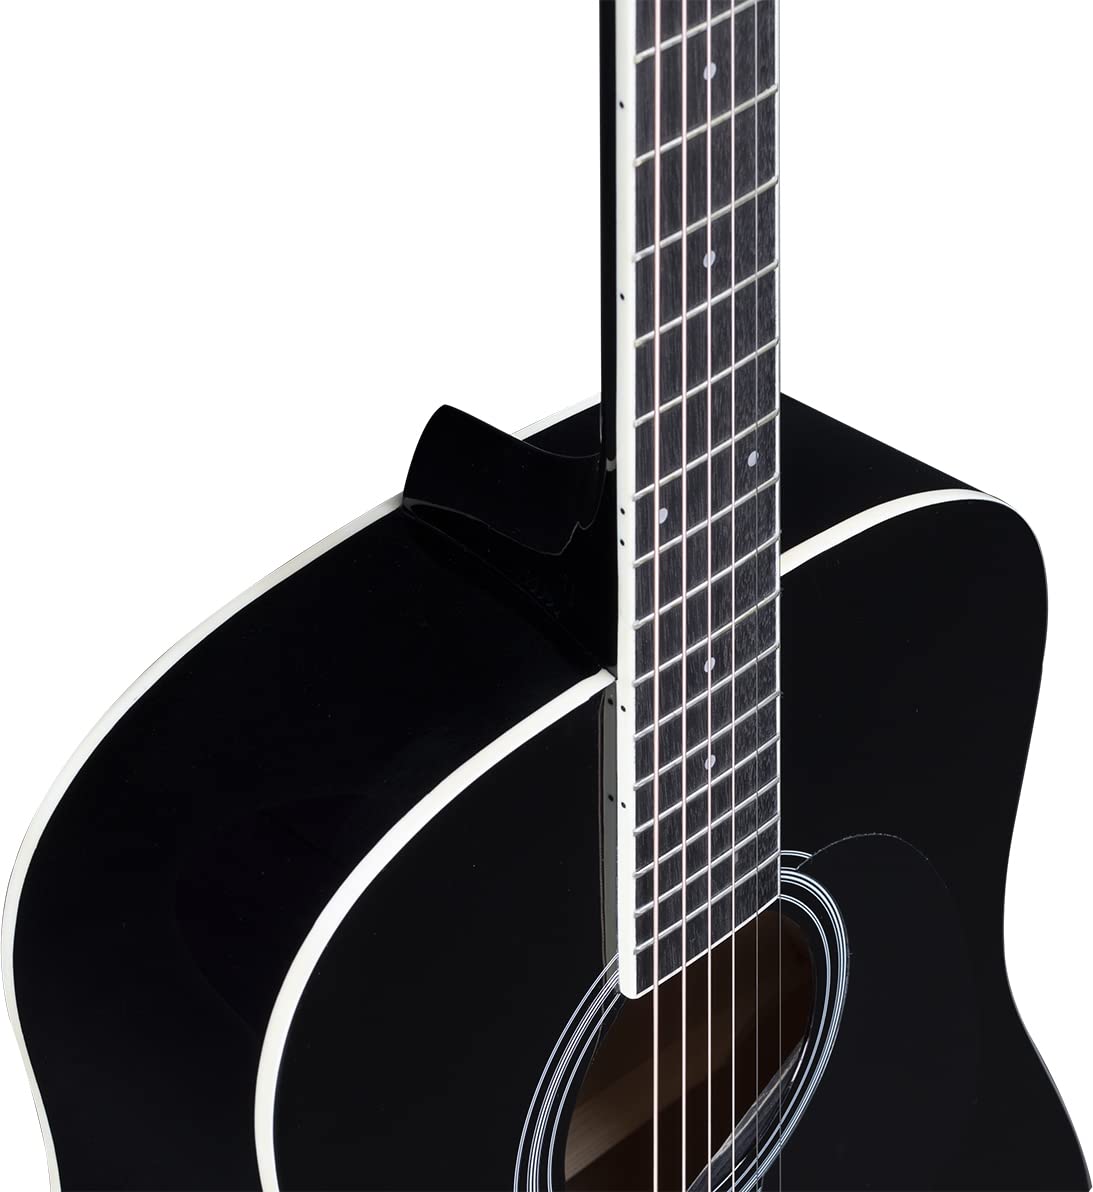 Stretton Acoustic Guitar Full Size Dreadnought 41 Inch Steel String Package D1 - Includes Everything a Beginner Needs To Get Started Playing Guitar - Black